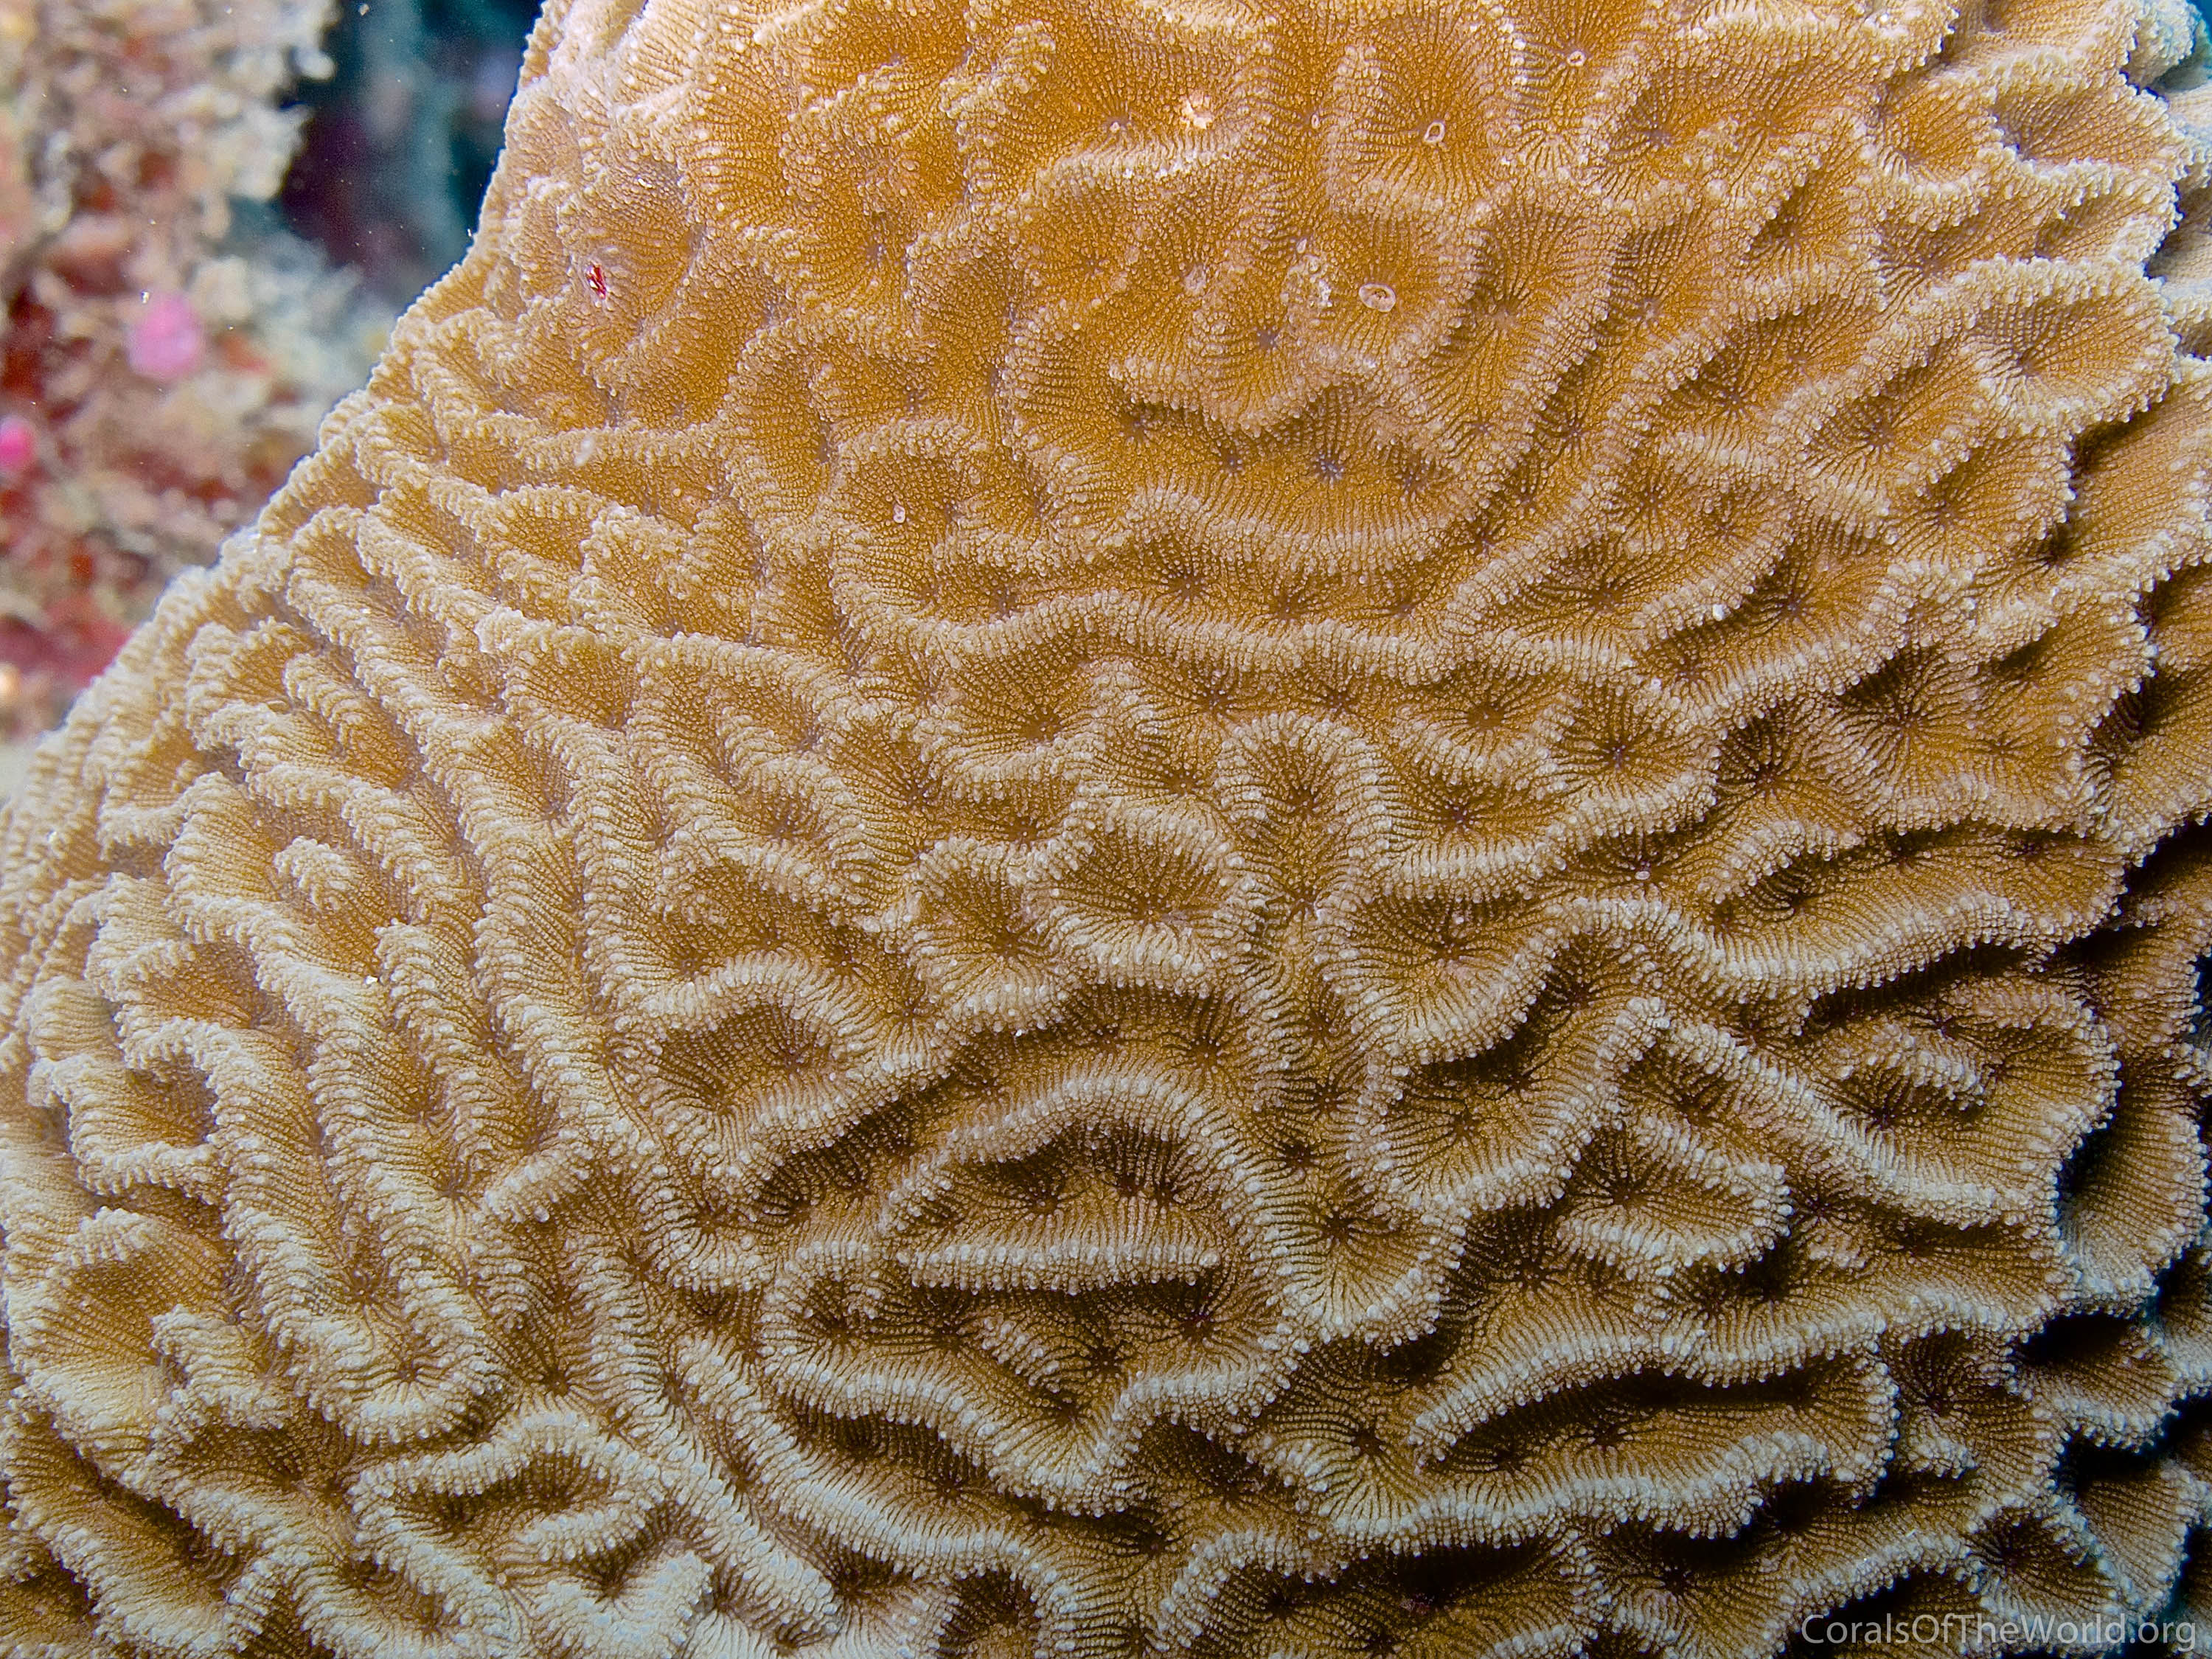 The Coven of Corals